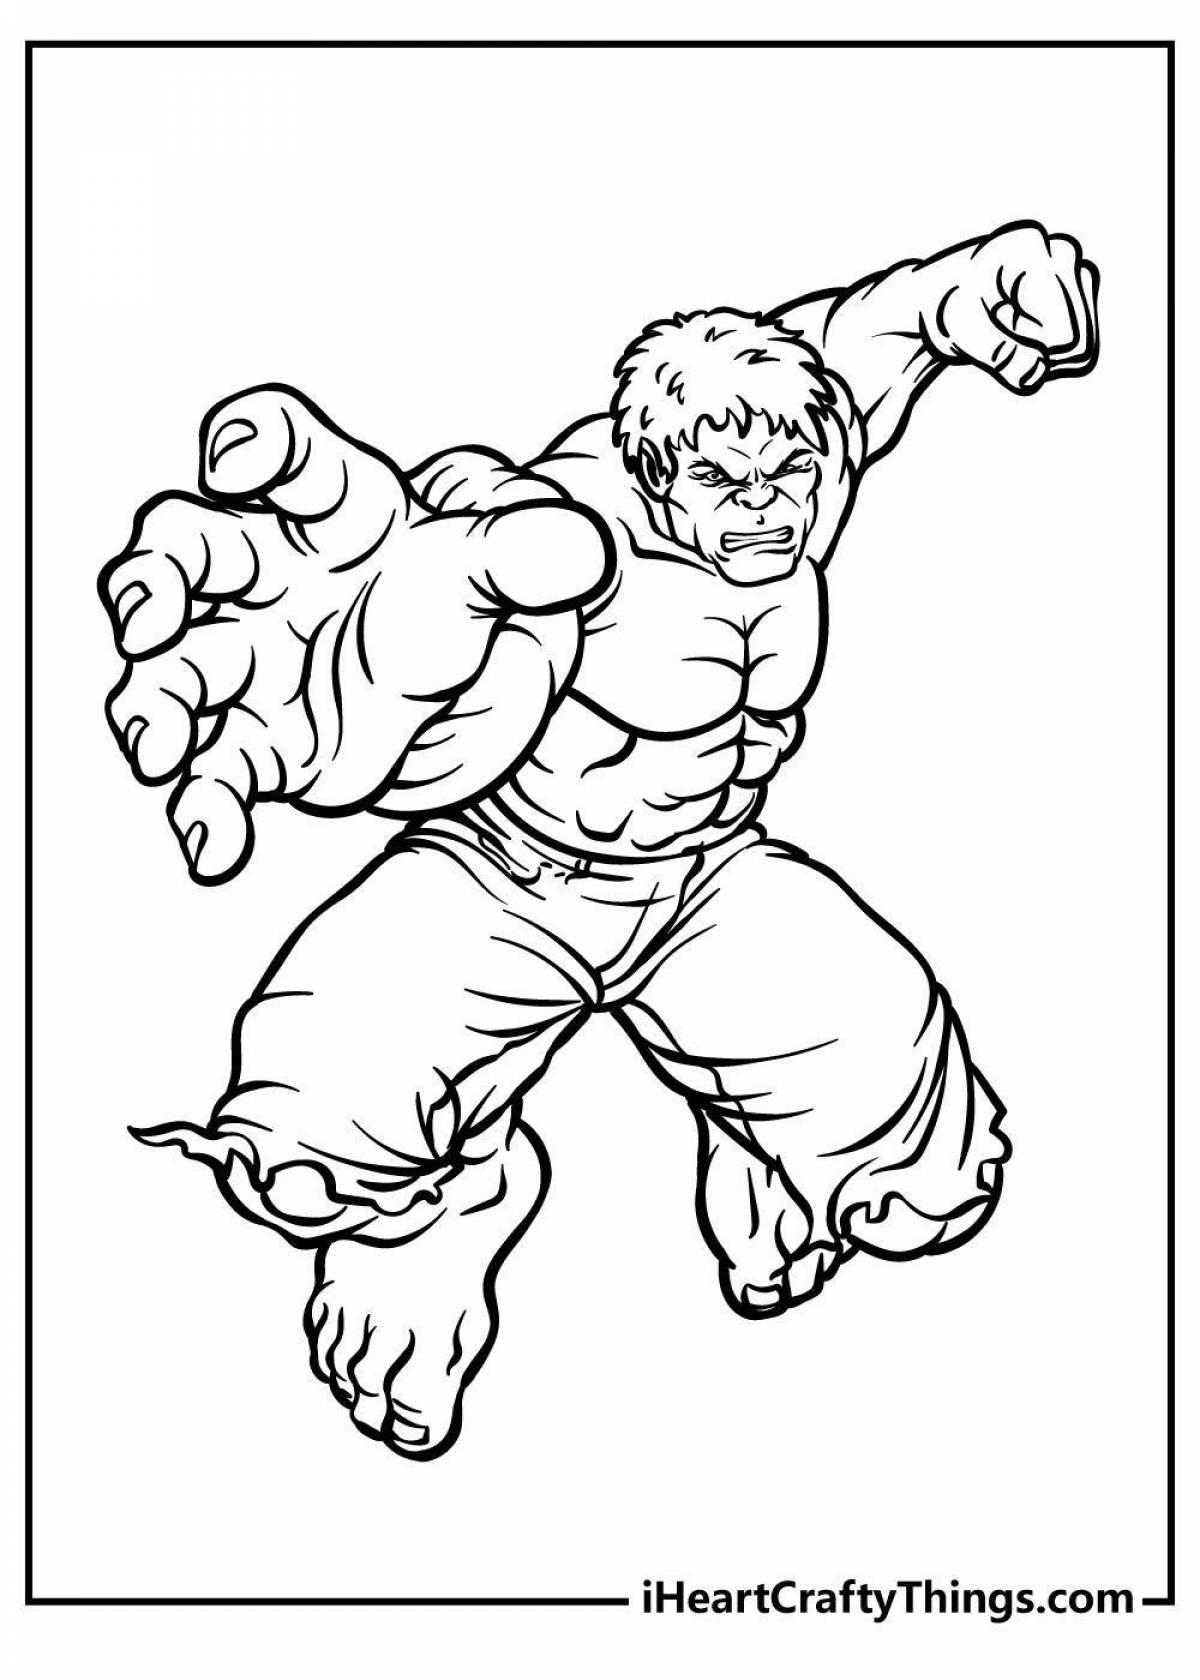 Wonderful Hulk coloring book for children 4-5 years old